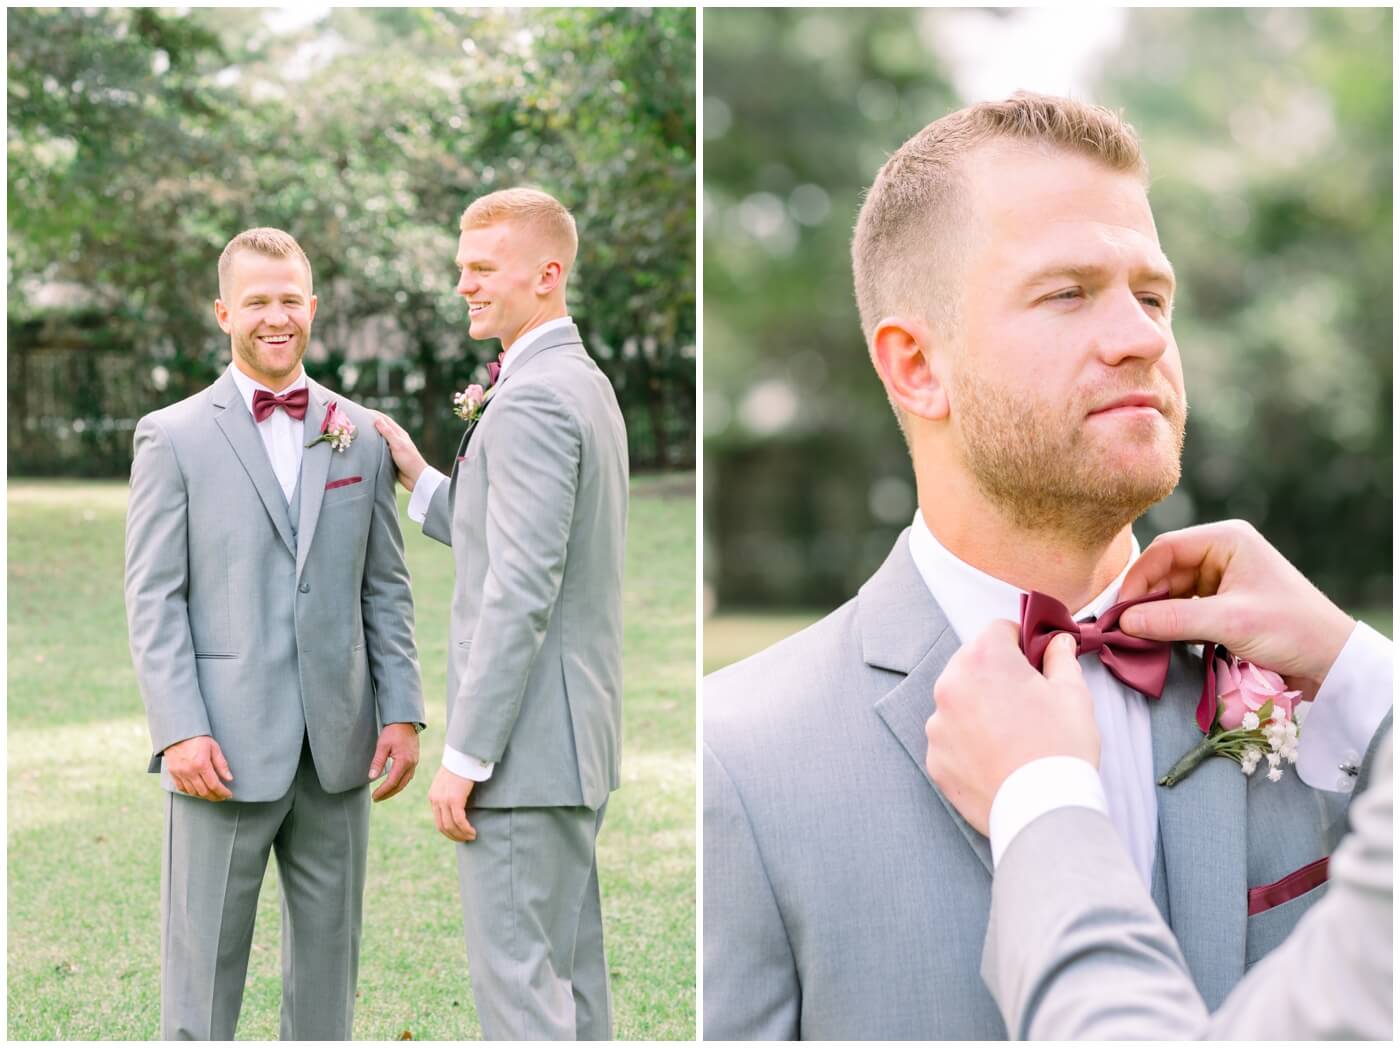 a groom's brother helps his brother get ready on his wedding day 